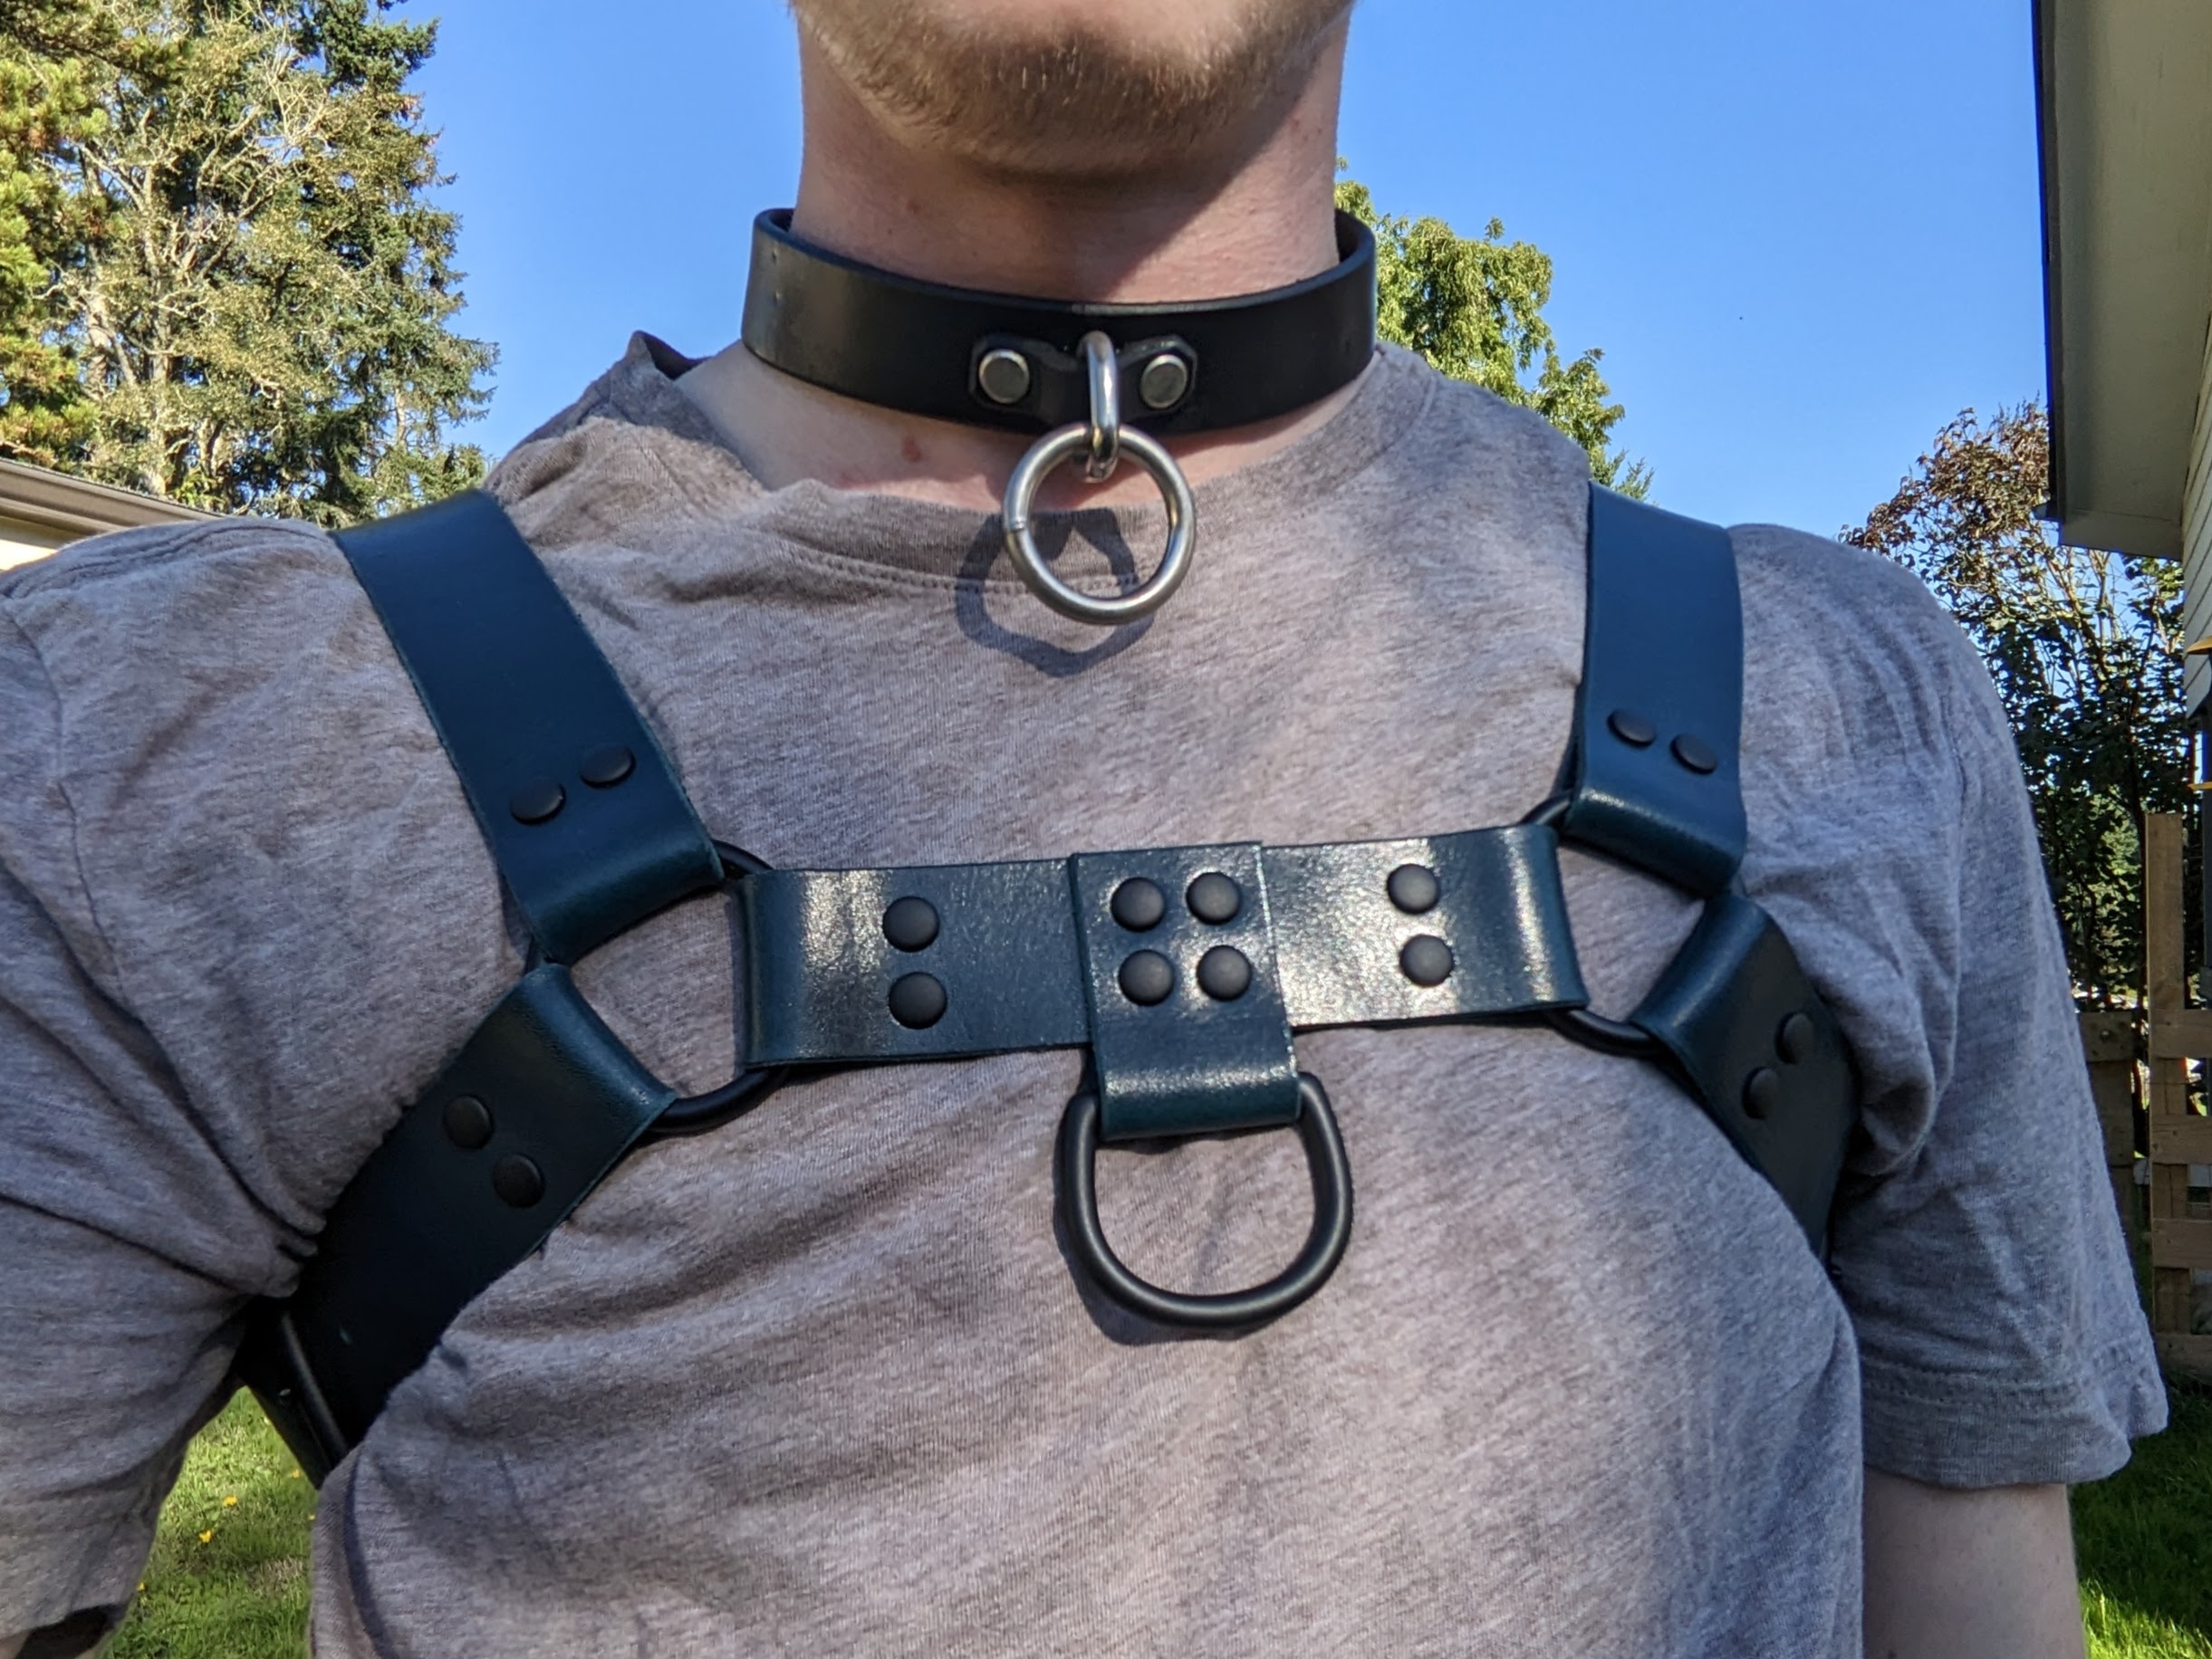 Someone from chin to mid-torso, wearing a dark teal leather chest harness with matte black fittings over a t shirt.